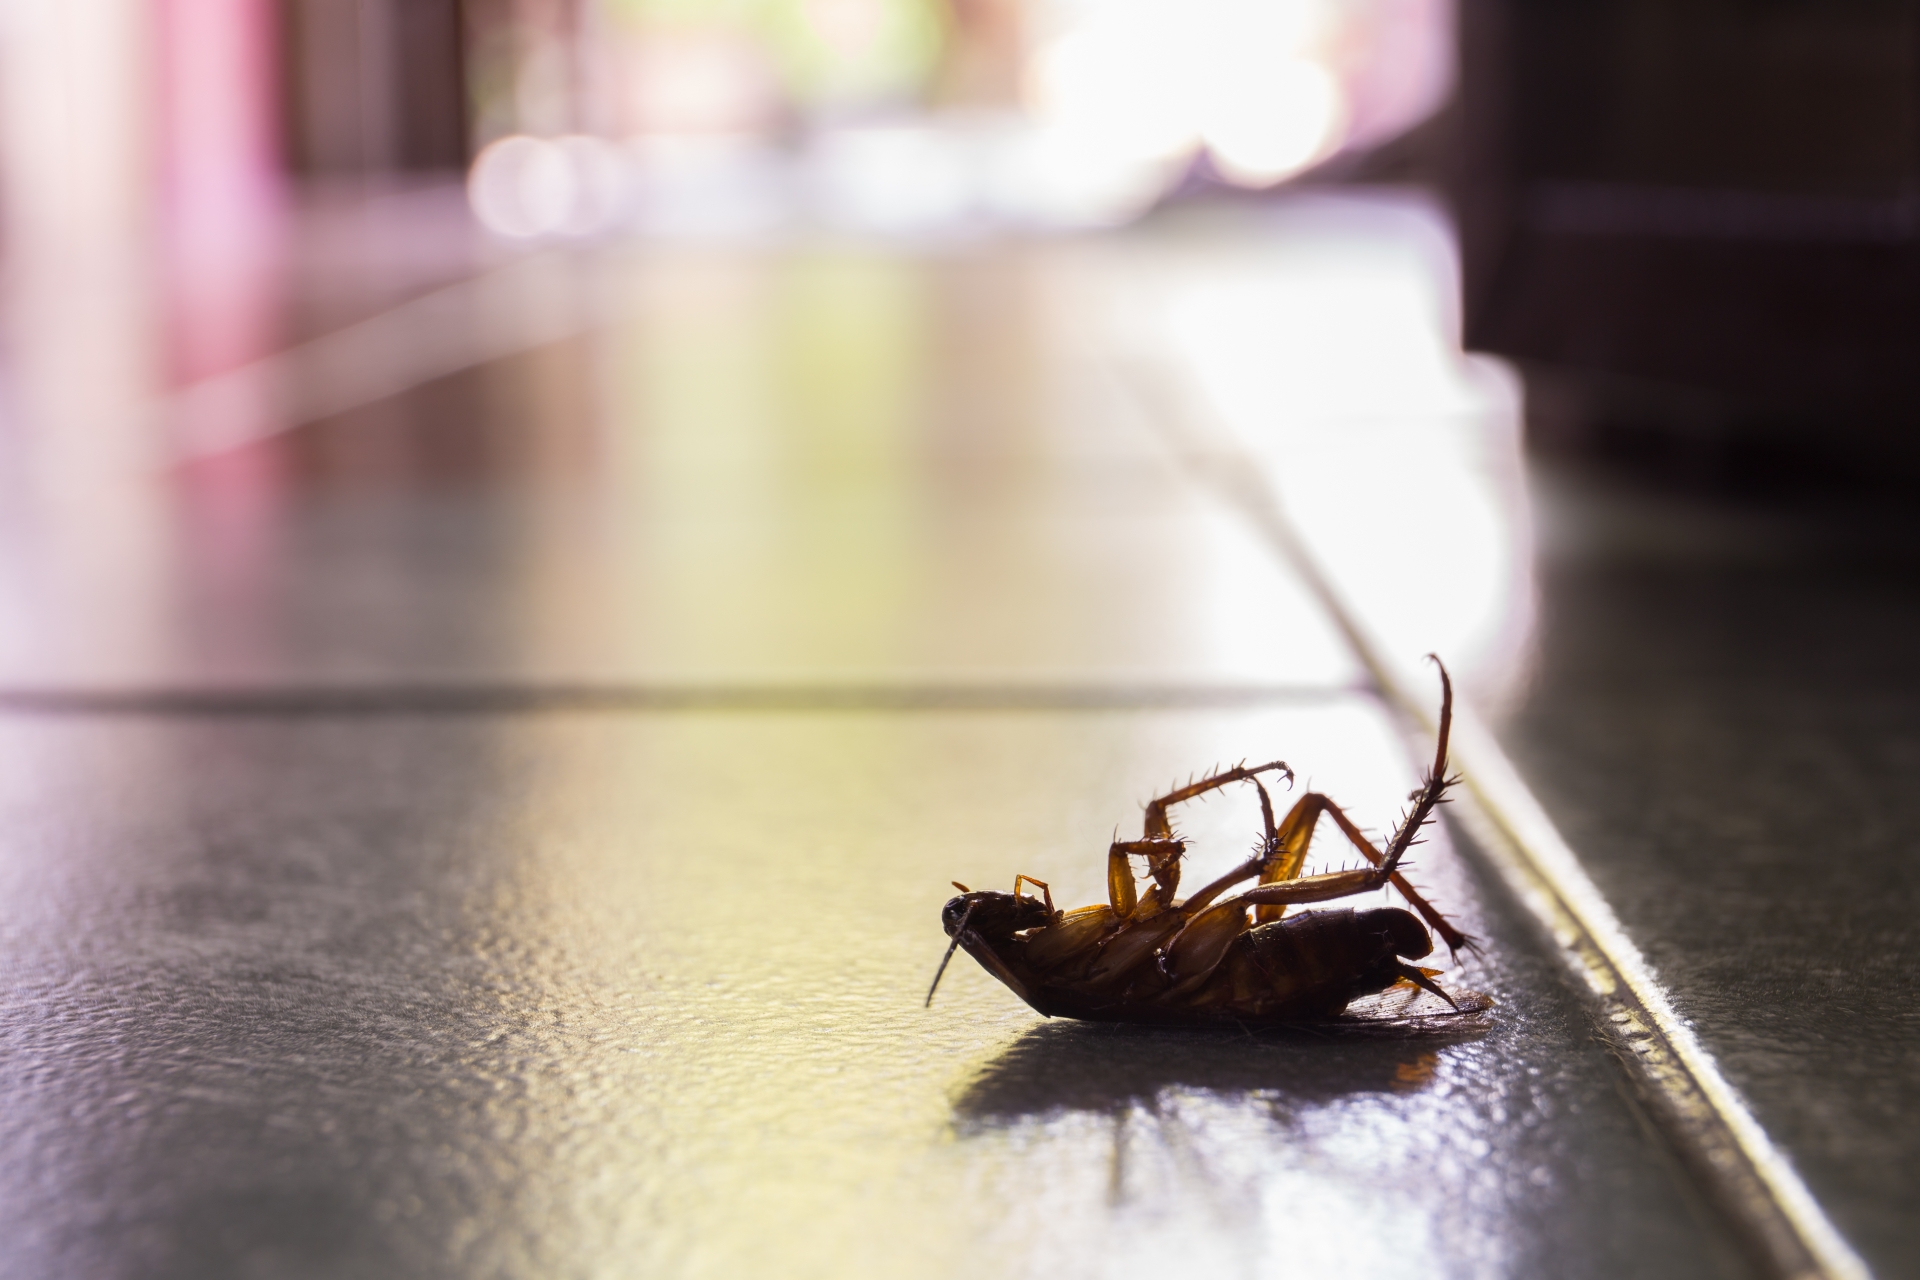 Cockroach Control, Pest Control in Ponders End, Enfield Wash, EN3. Call Now 020 8166 9746